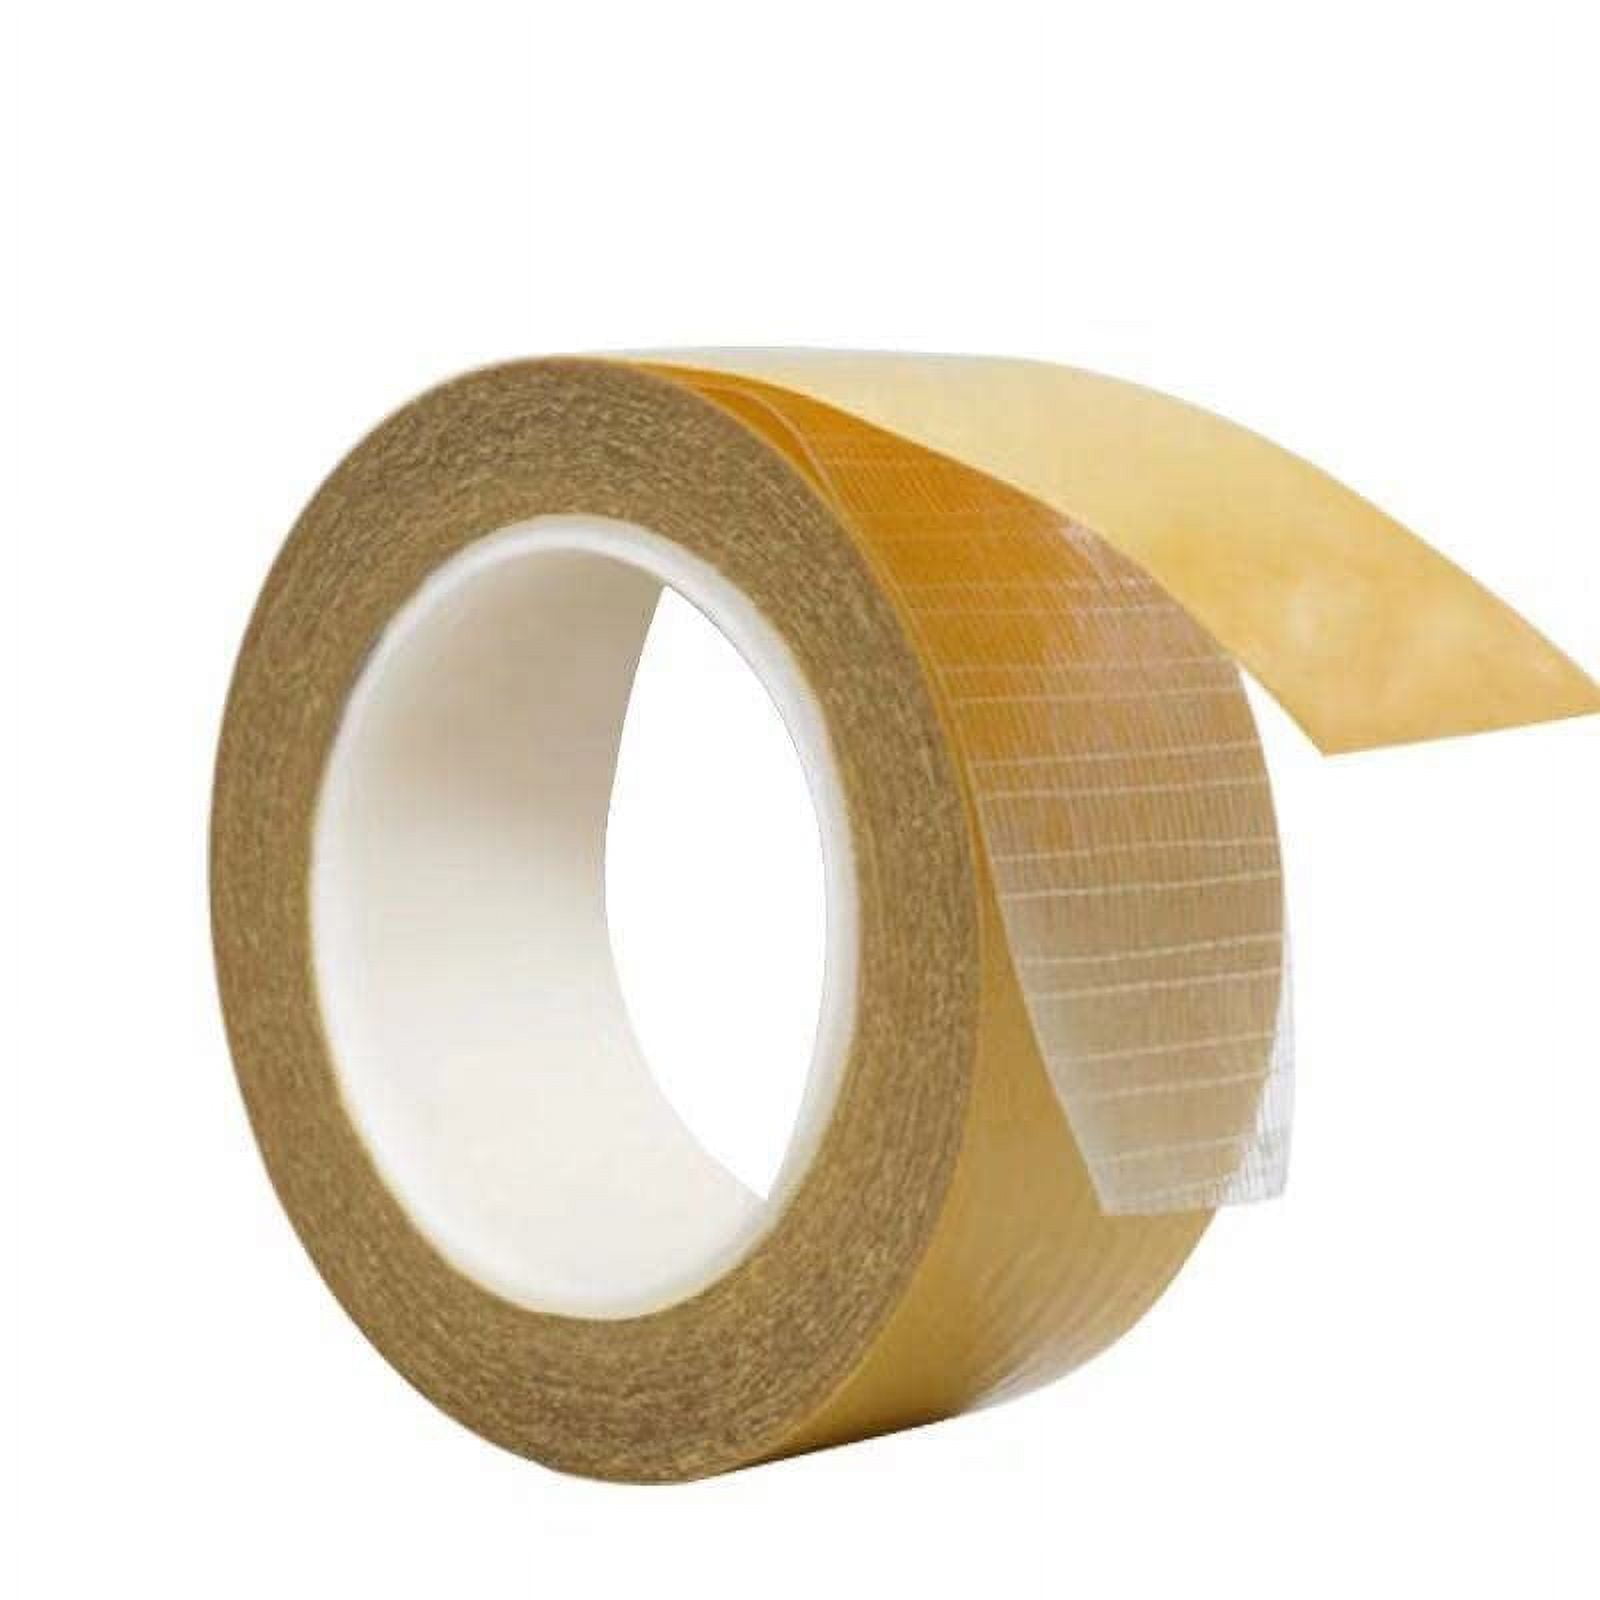 Wod Tape Dcct61hm Double Sided Carpet Tape - 1/2 in x 36 yds - High Adhesion, Yellow